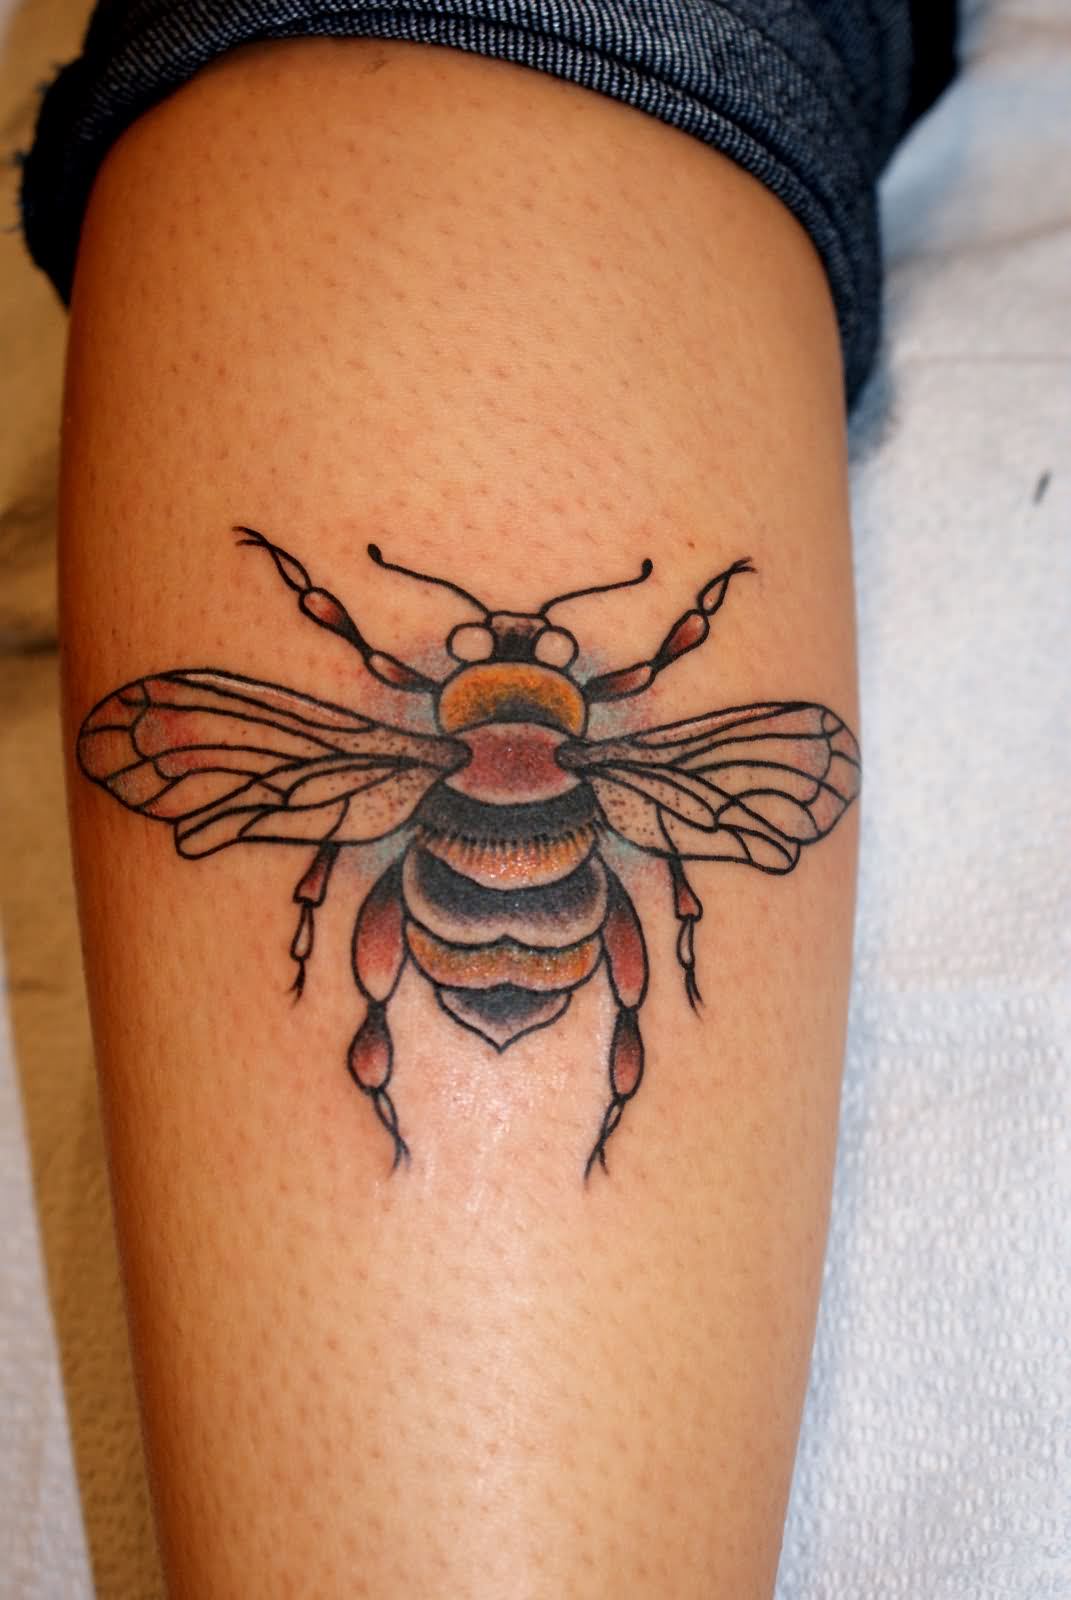 Traditional Bee Tattoo Design For Leg